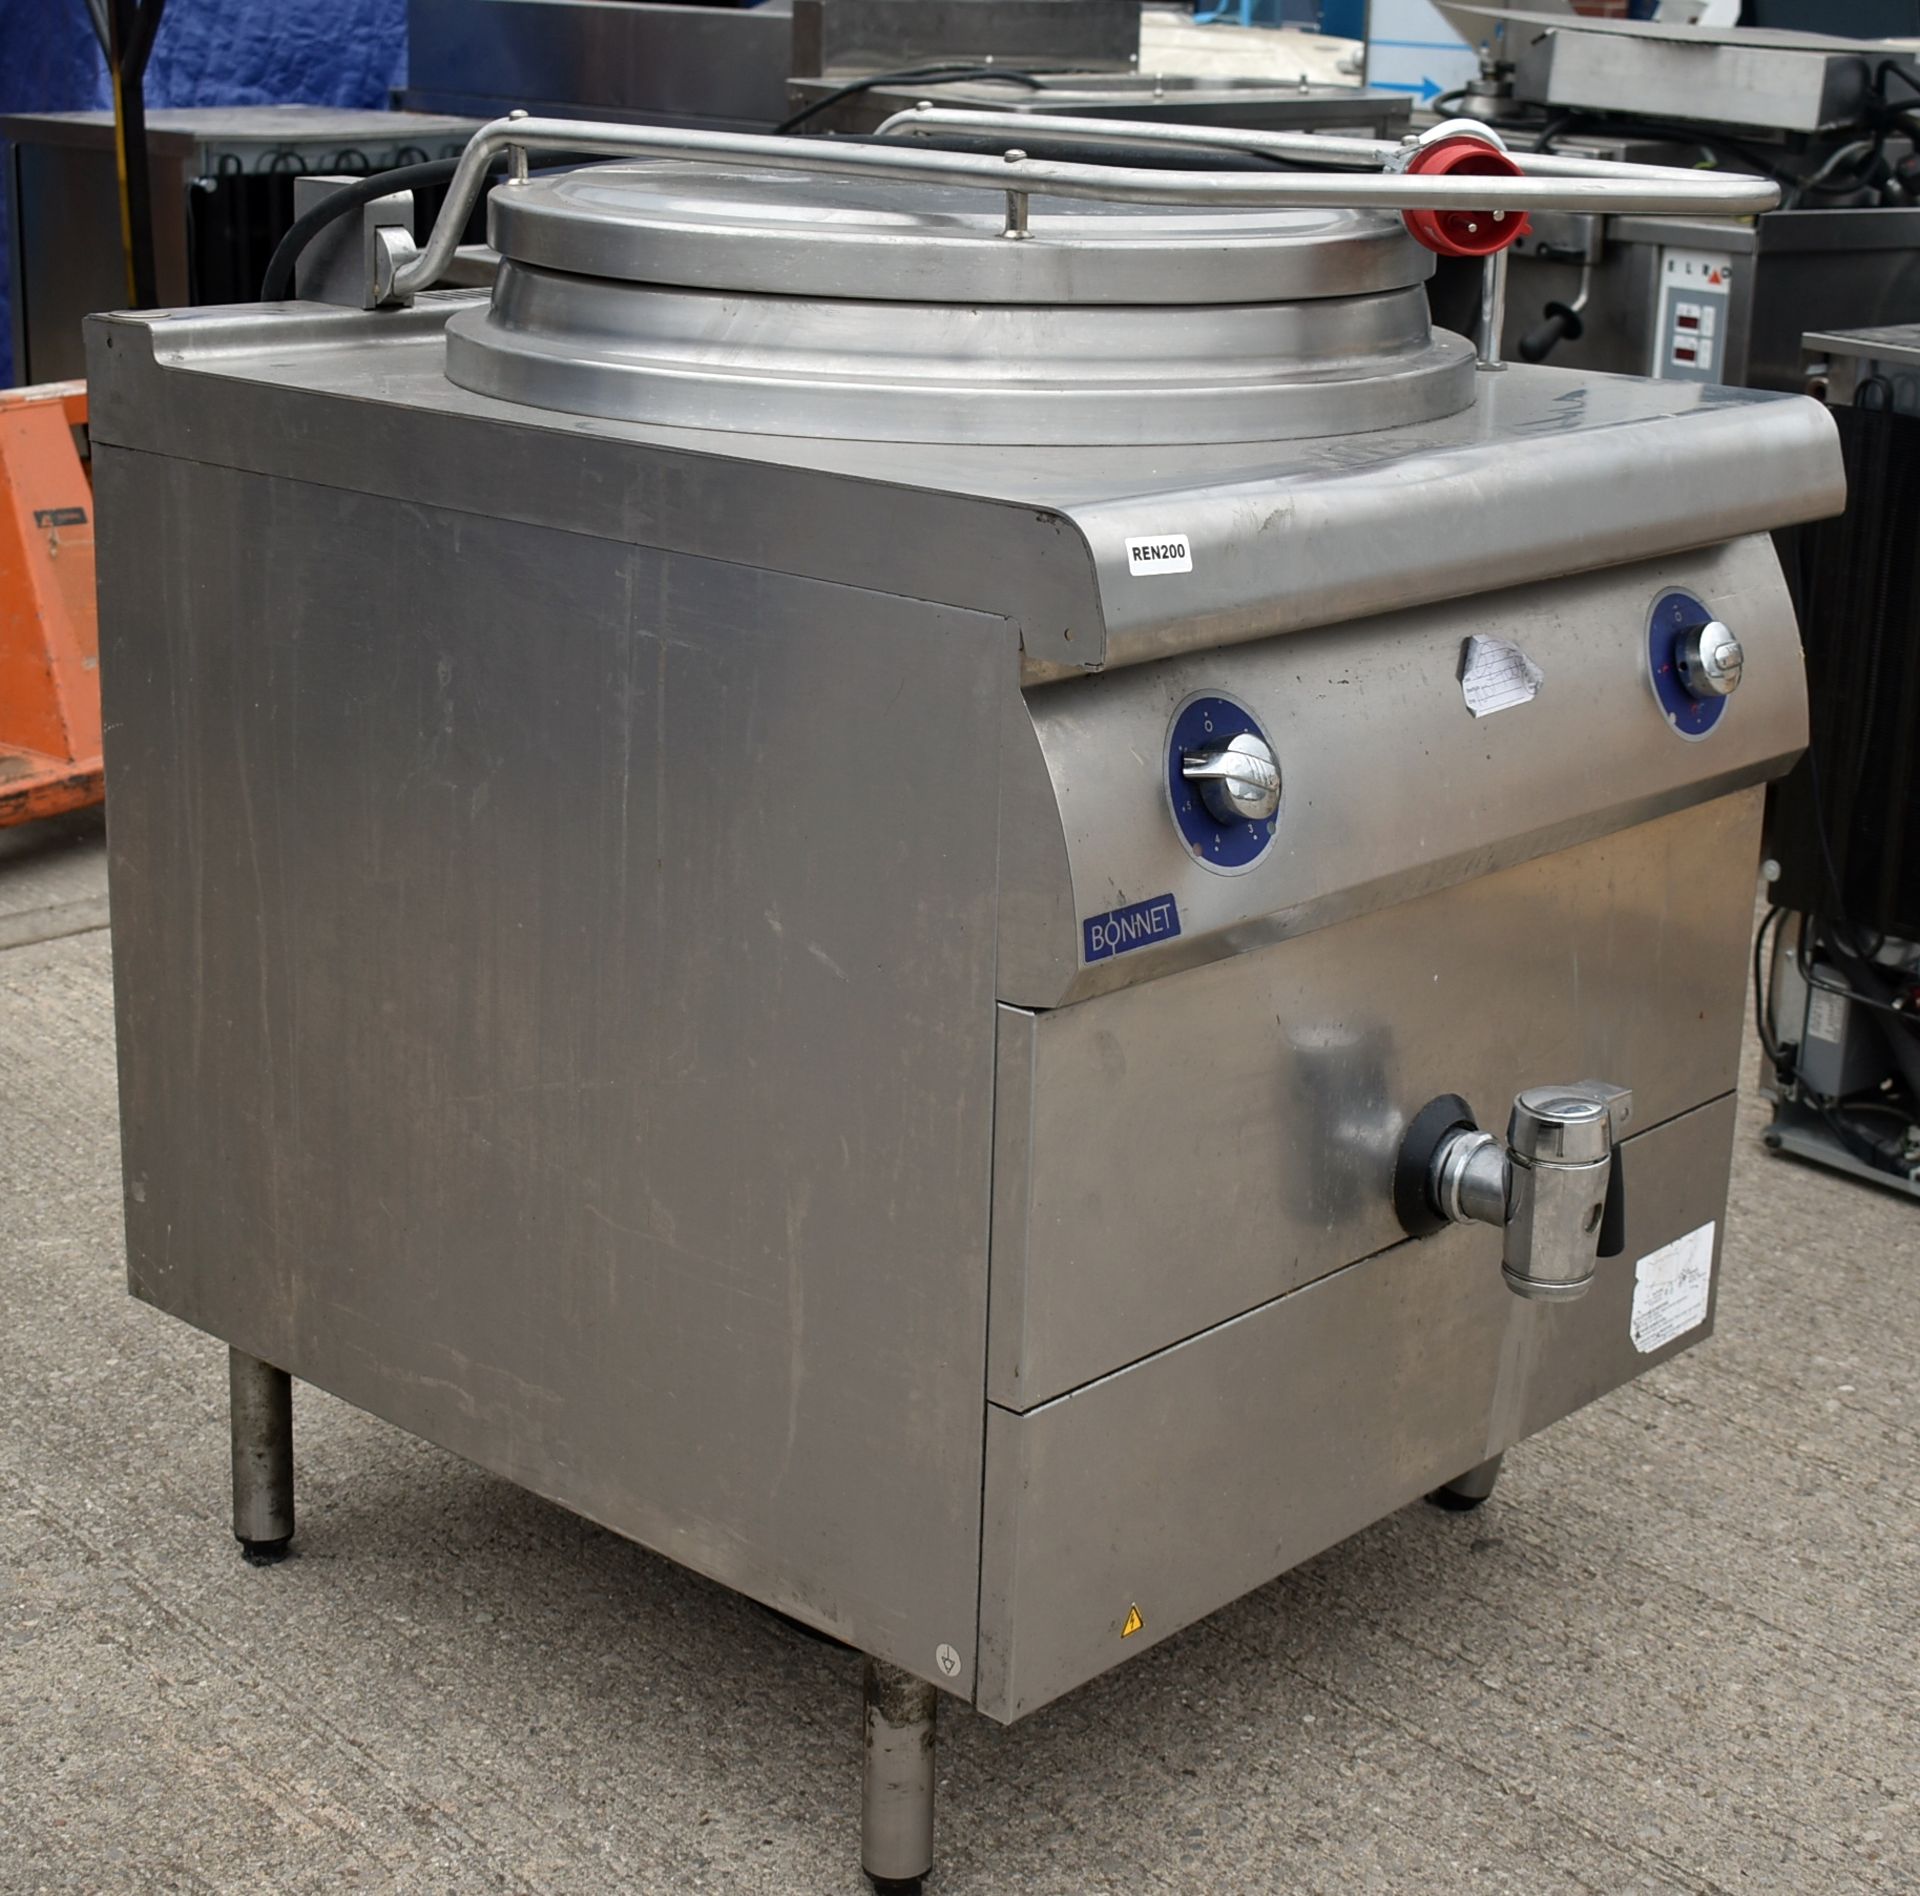 1 x Bonnet Advancia Boiling Pan With Stainless Steel Finish - 3 Phase - RRP: £8,000 - Image 2 of 14